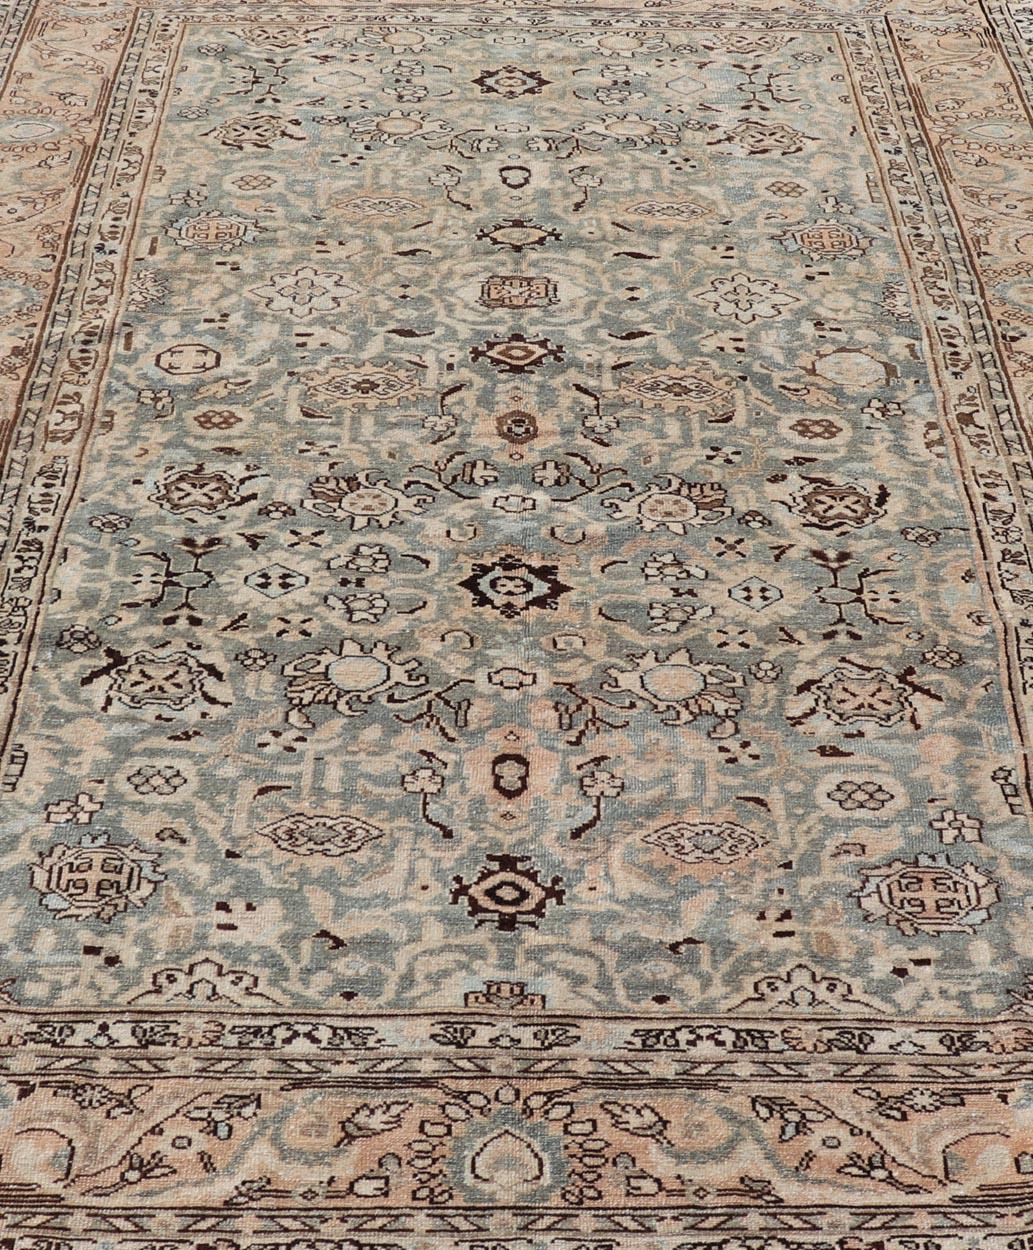 All-Over Floral Antique Persian Hamadan Rug in Gray Green, Peach & Earth Tones For Sale 3